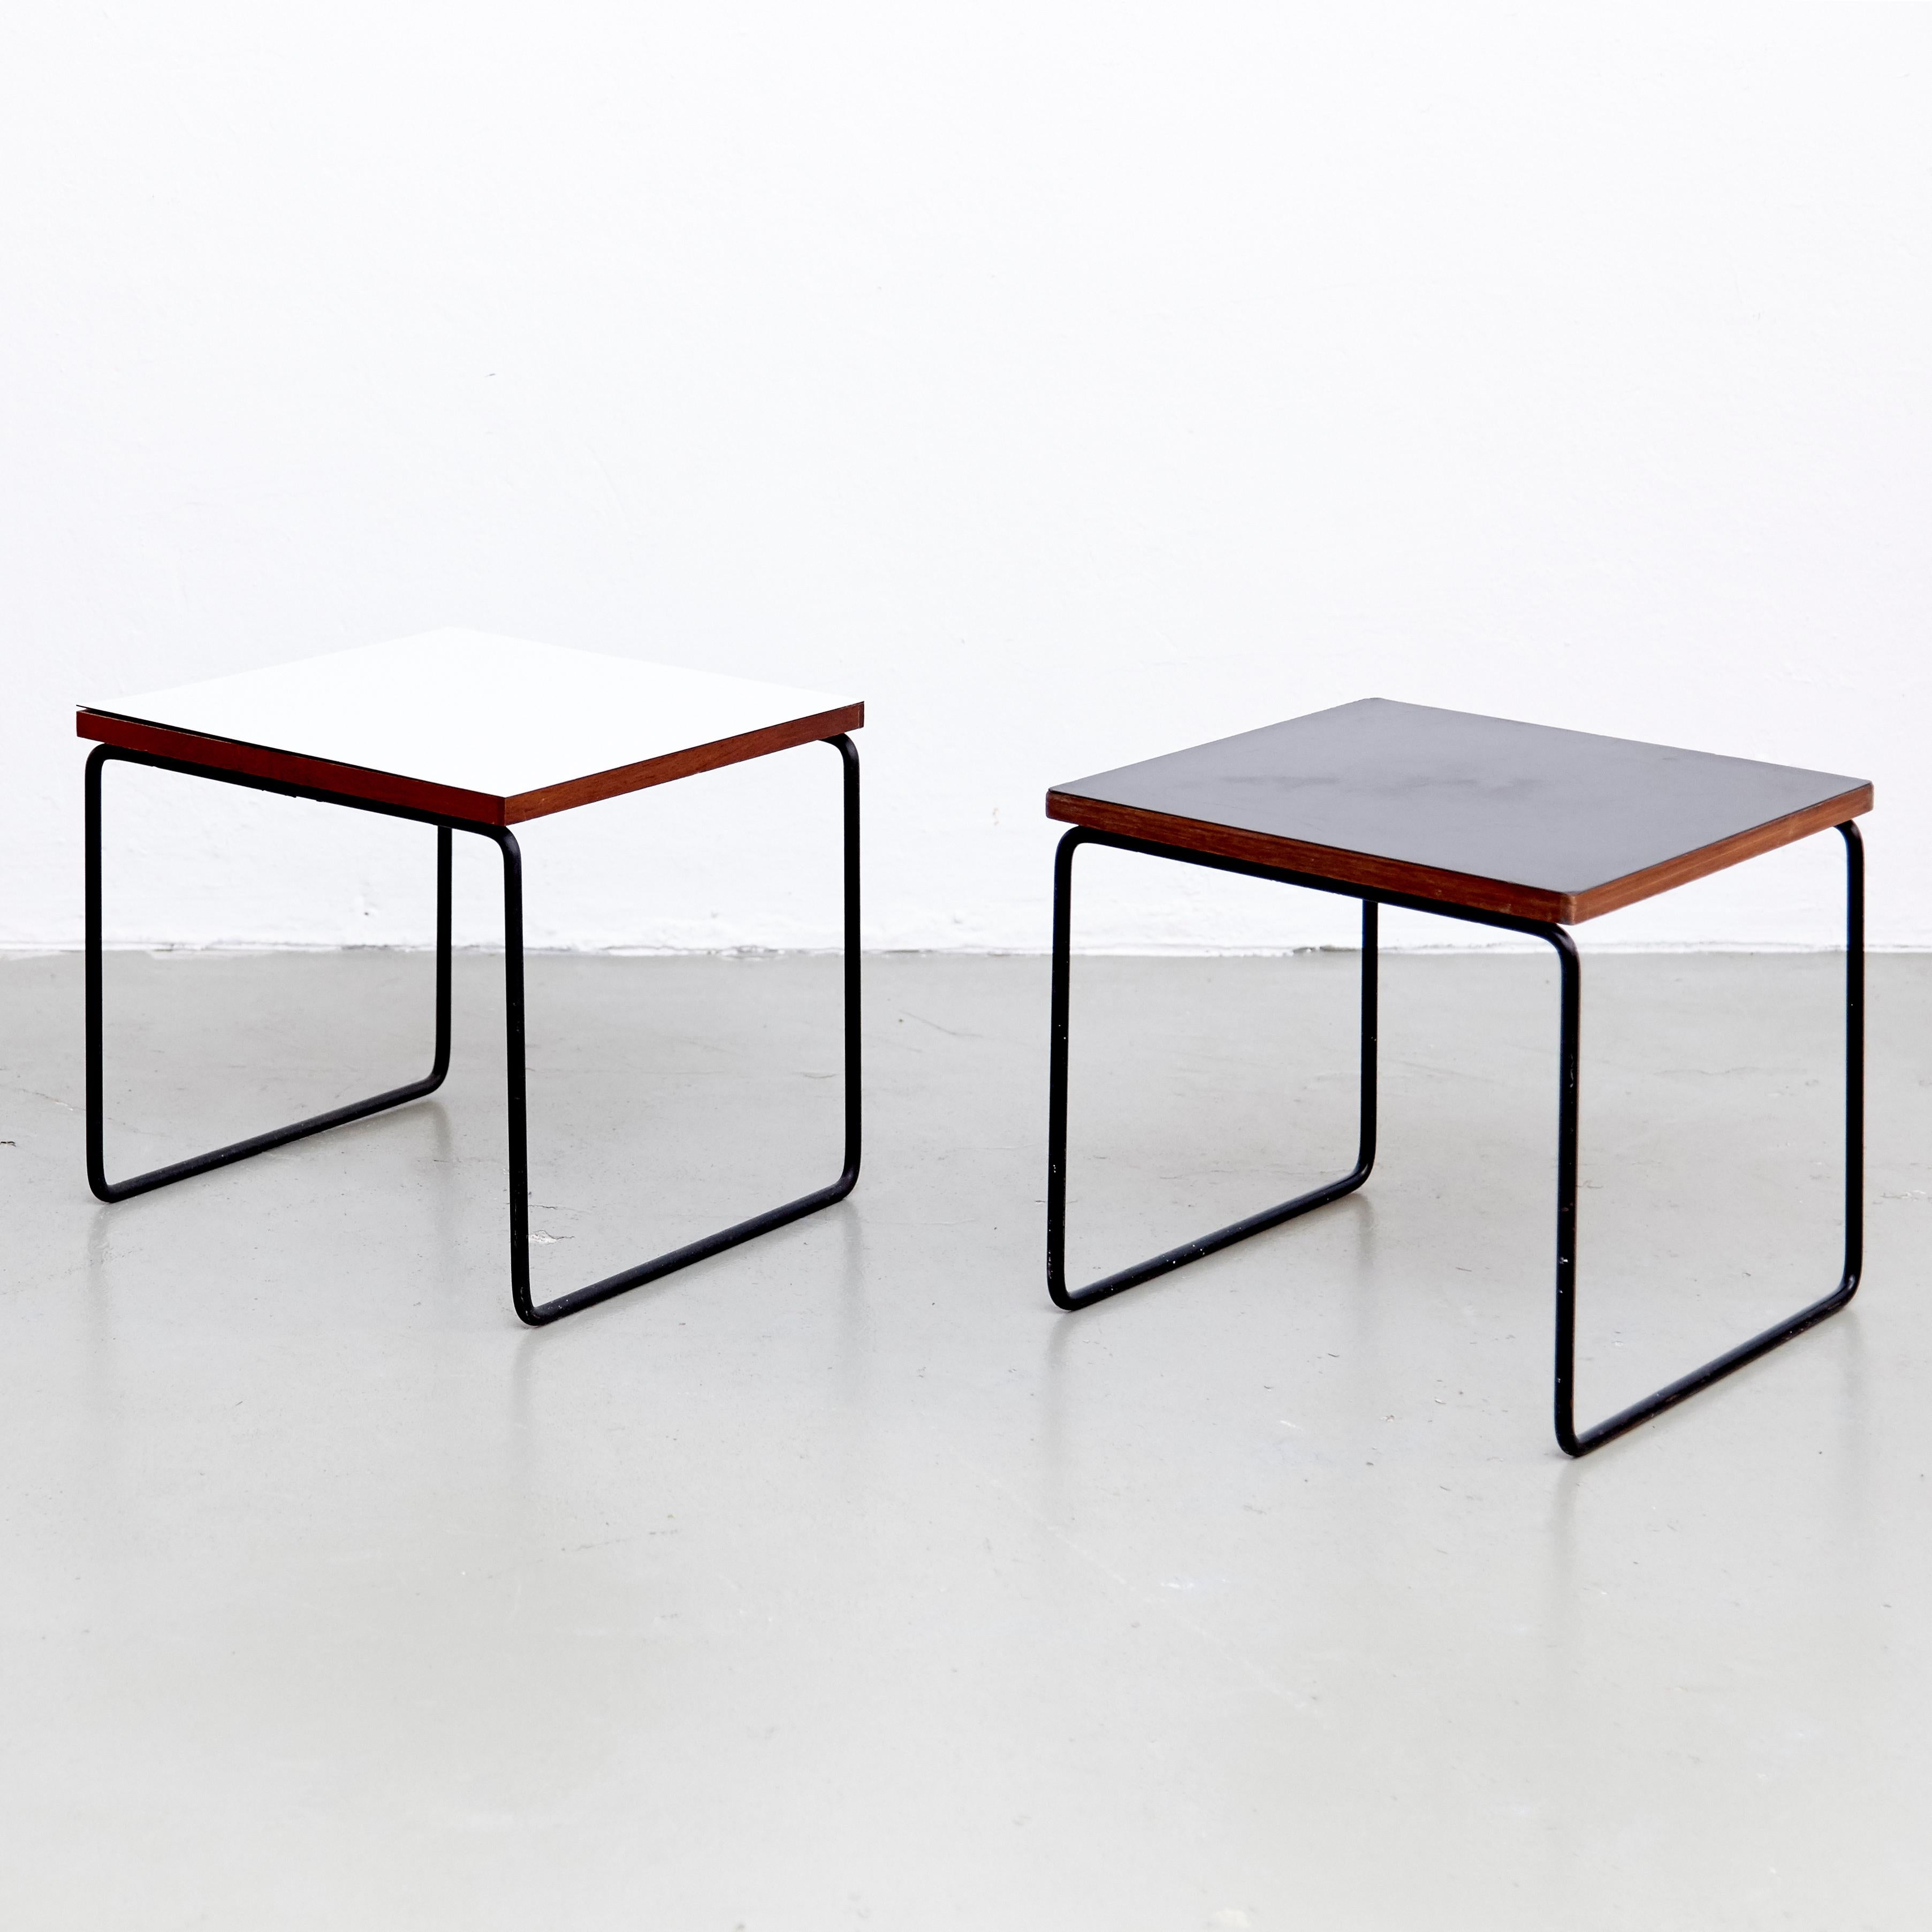 Set of two side tables designed by Pierre Guariche.
Manufactured by Steiner (France), circa 1950.
Bent and painted iron frame, laminated wood.

One table not signed. One table signed with applied manufacturer's label to underside: